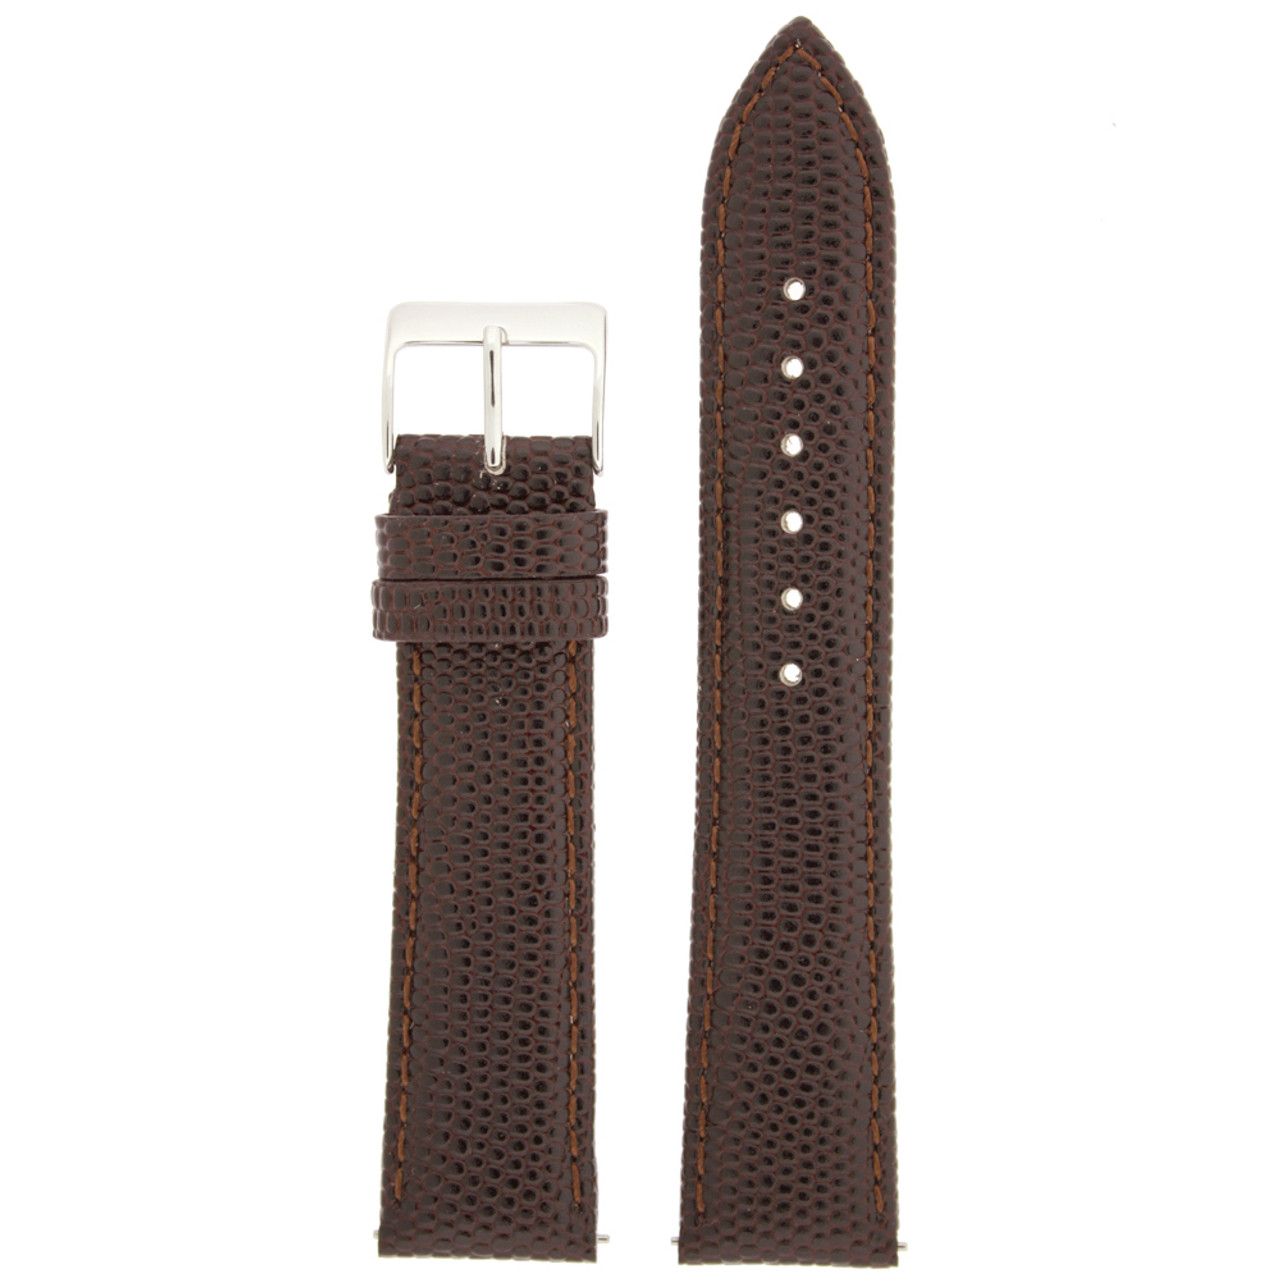 Watch Band Genuine Leather Lizard Grain Brown Quick Release Built-in Pins